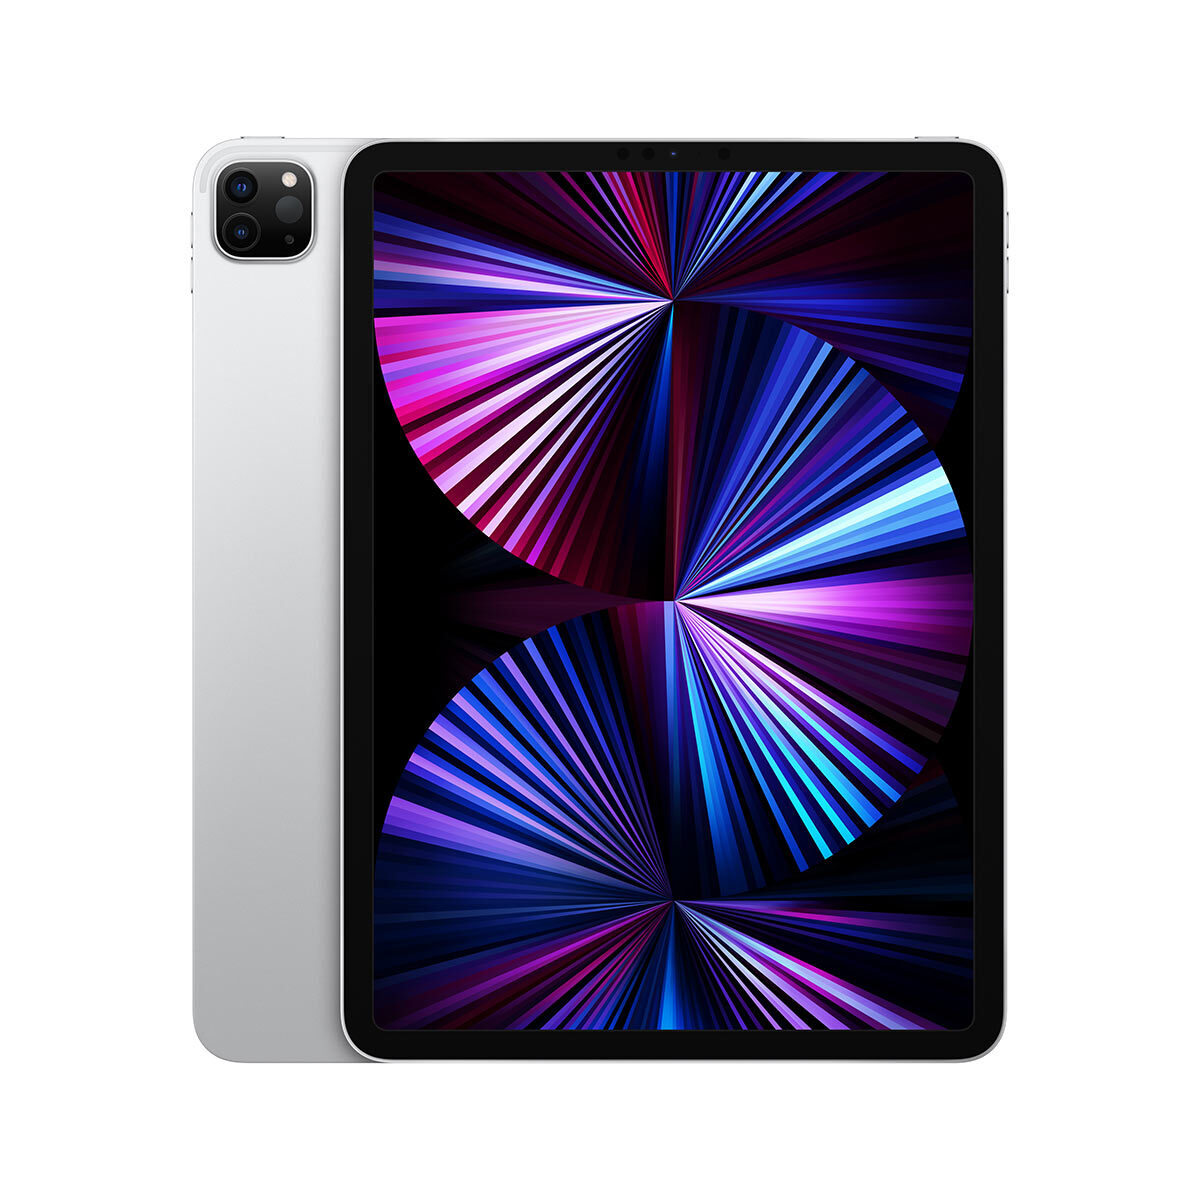 Buy Apple iPad Pro 2021, 11 Inch, 128GB, Wifi MHQR3B/A in Space Grey at costco.co.uk